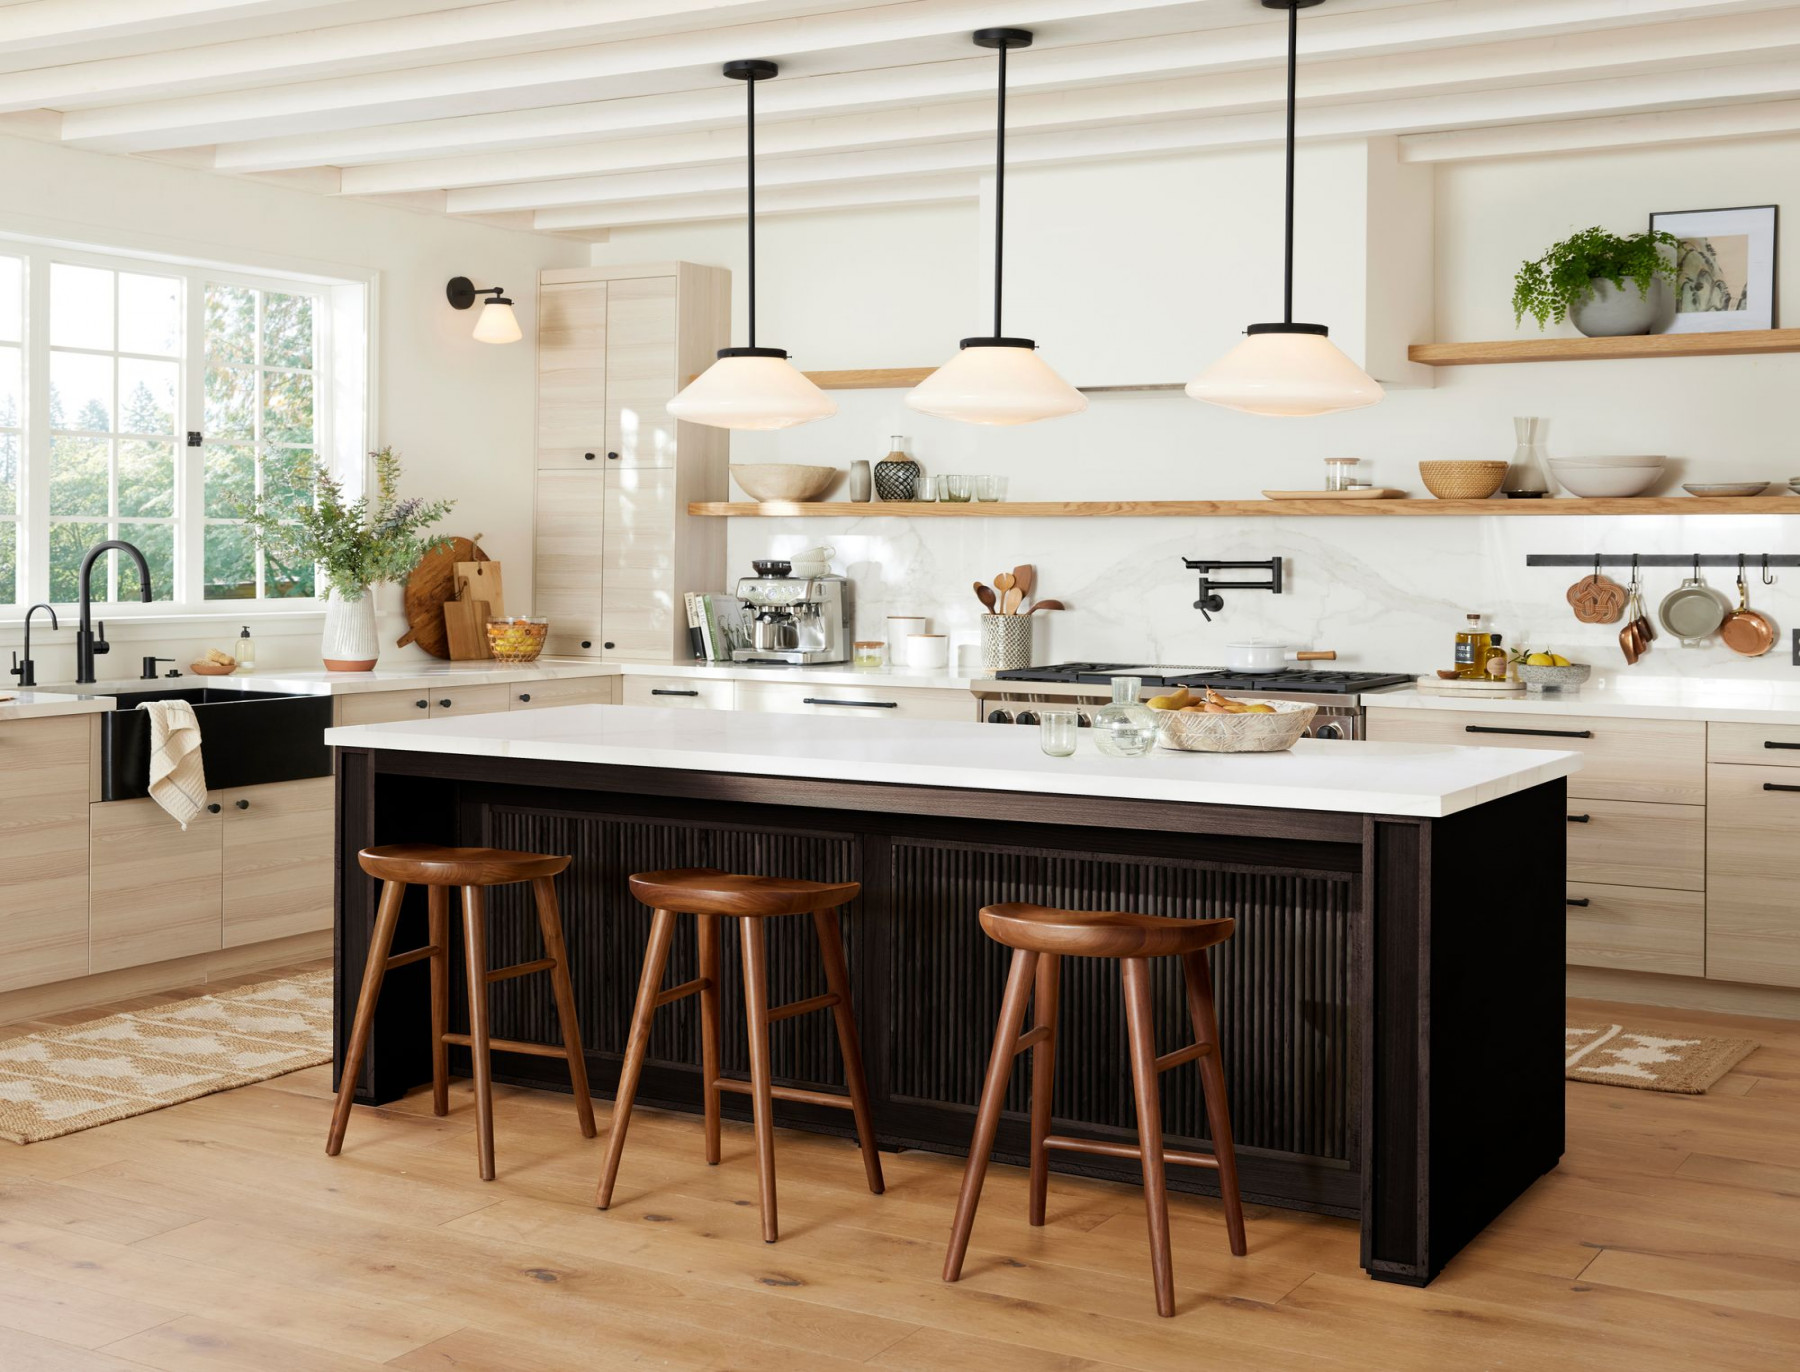 How to Light Your Kitchen Island